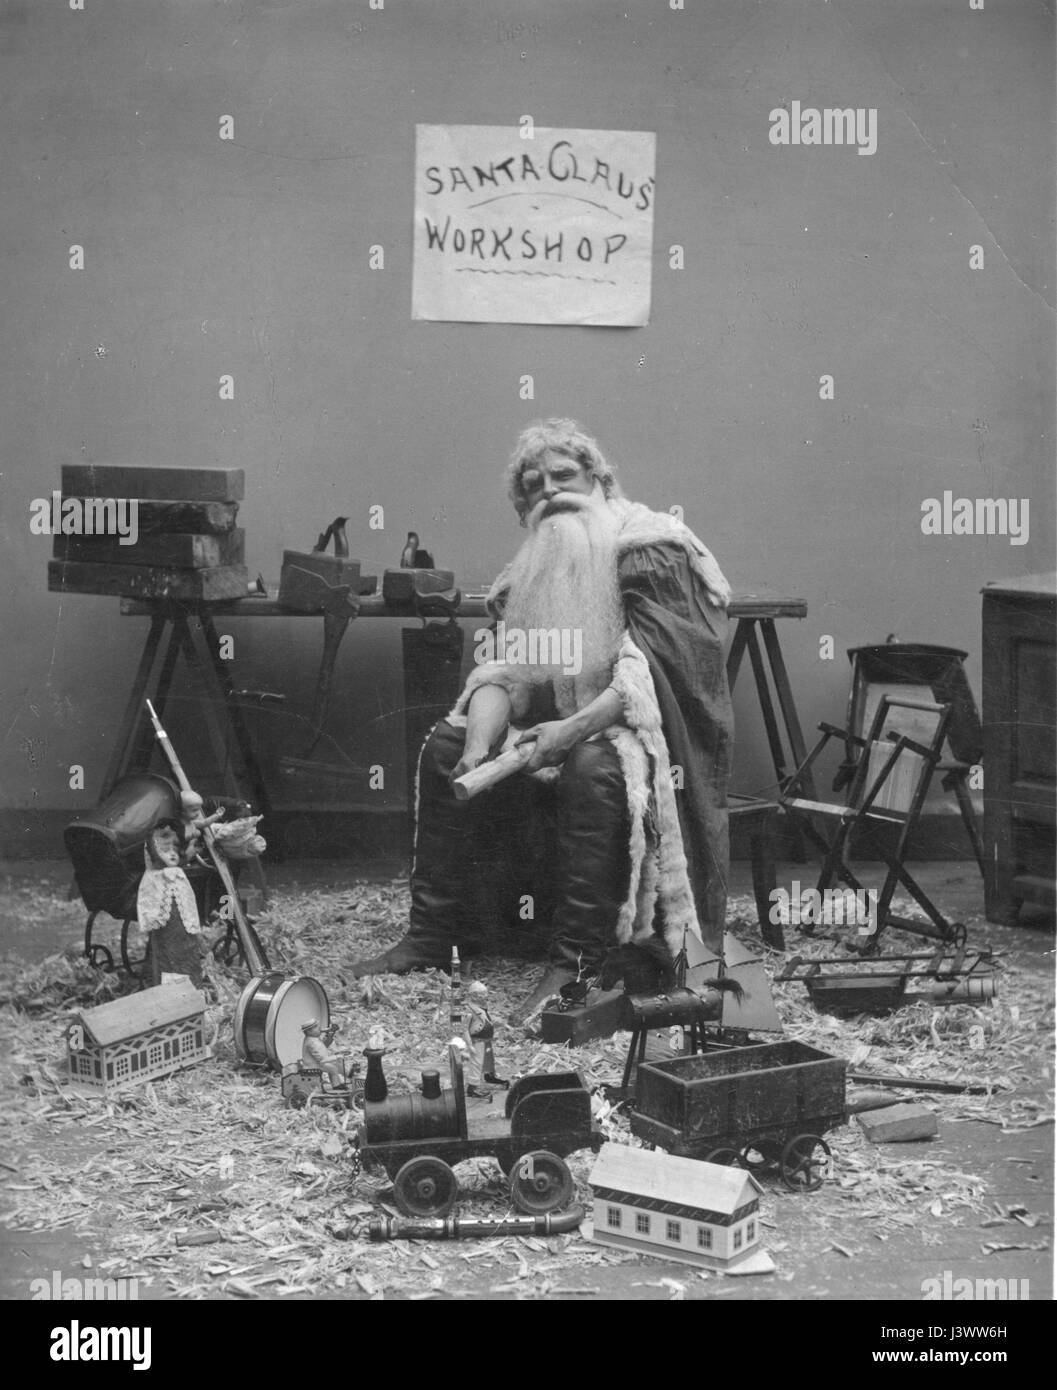 'Santa Claus' Workshop'  Santa is whittling a new toy, while sitting in his workshop, c. 1908.  Completed toys around him are a drum, simple train engine with car, dolls and a toy baby carriage, a small hobby horse, a two-hand whistle, other small toys and lots of wood shavings. His work table holds wood planes, wood to be carved, and an ax and a saw hang from the table's side.  To see my other Christmas-related vintage images, Search:  Prestor  vintage  holiday Stock Photo